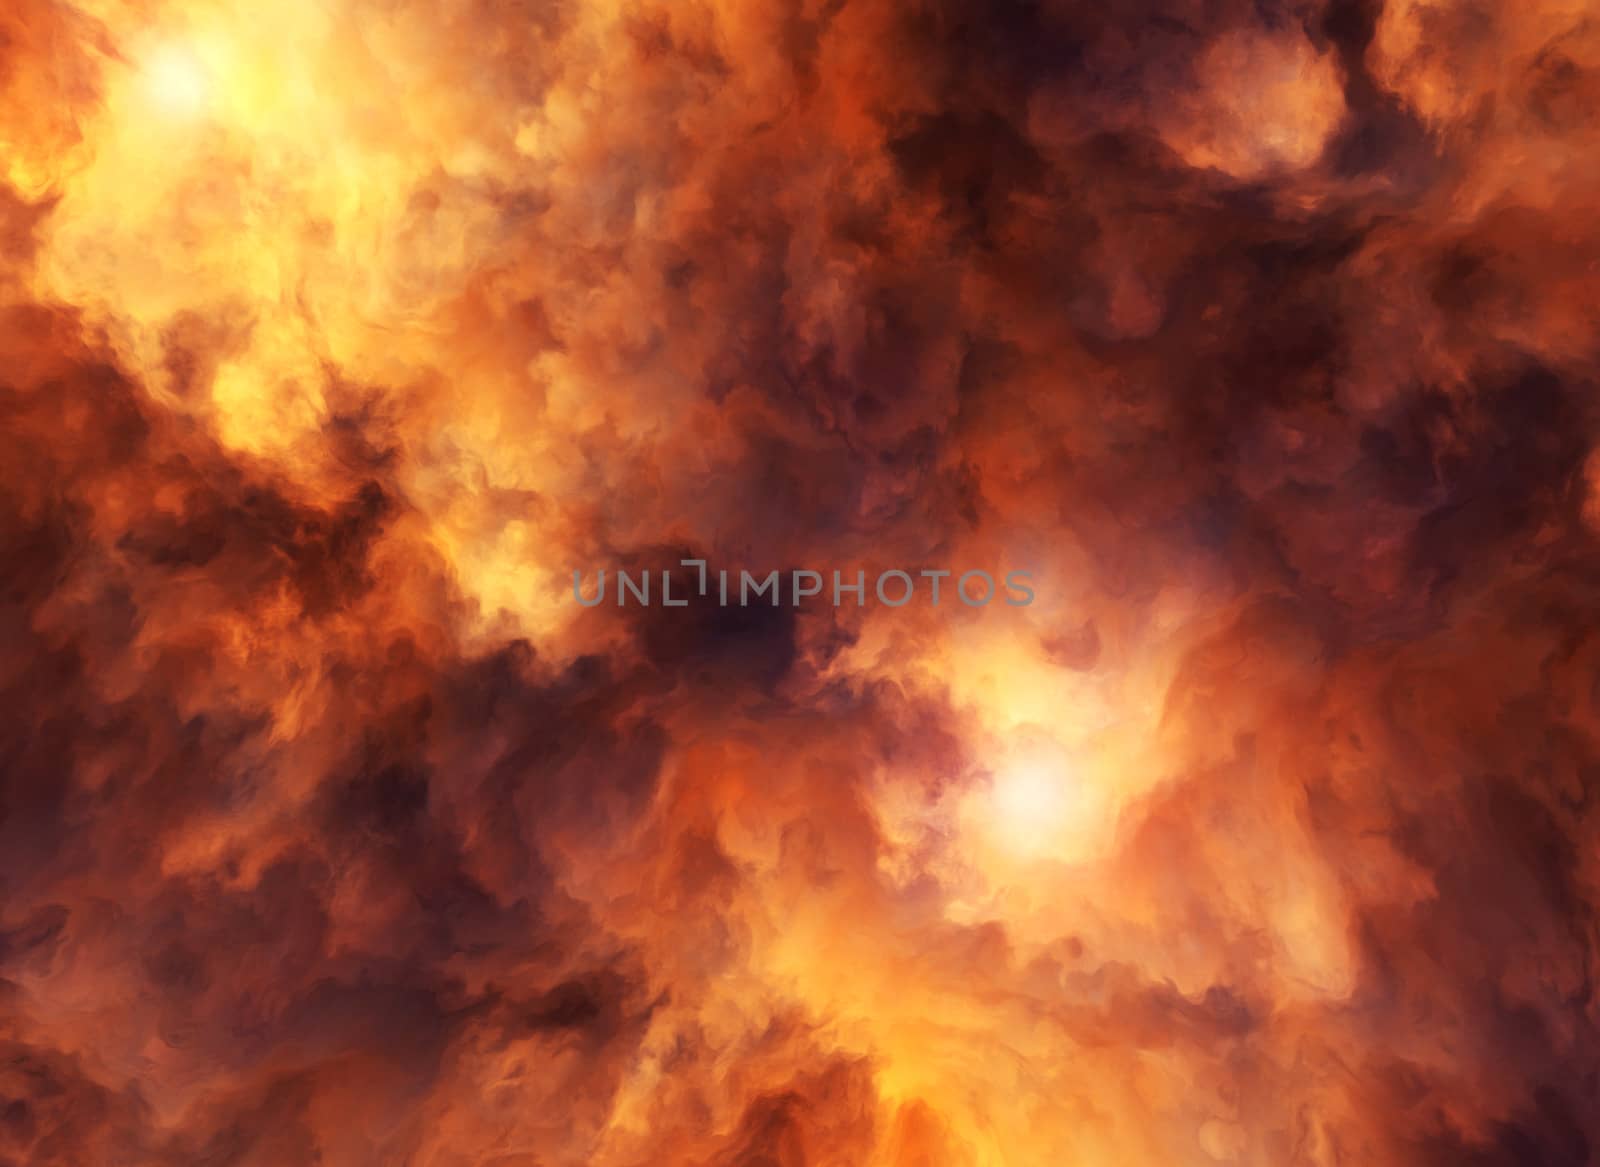 Illustrated roiling red and yellow clouds representing intense energy, massive explosion or fiery conflagration.